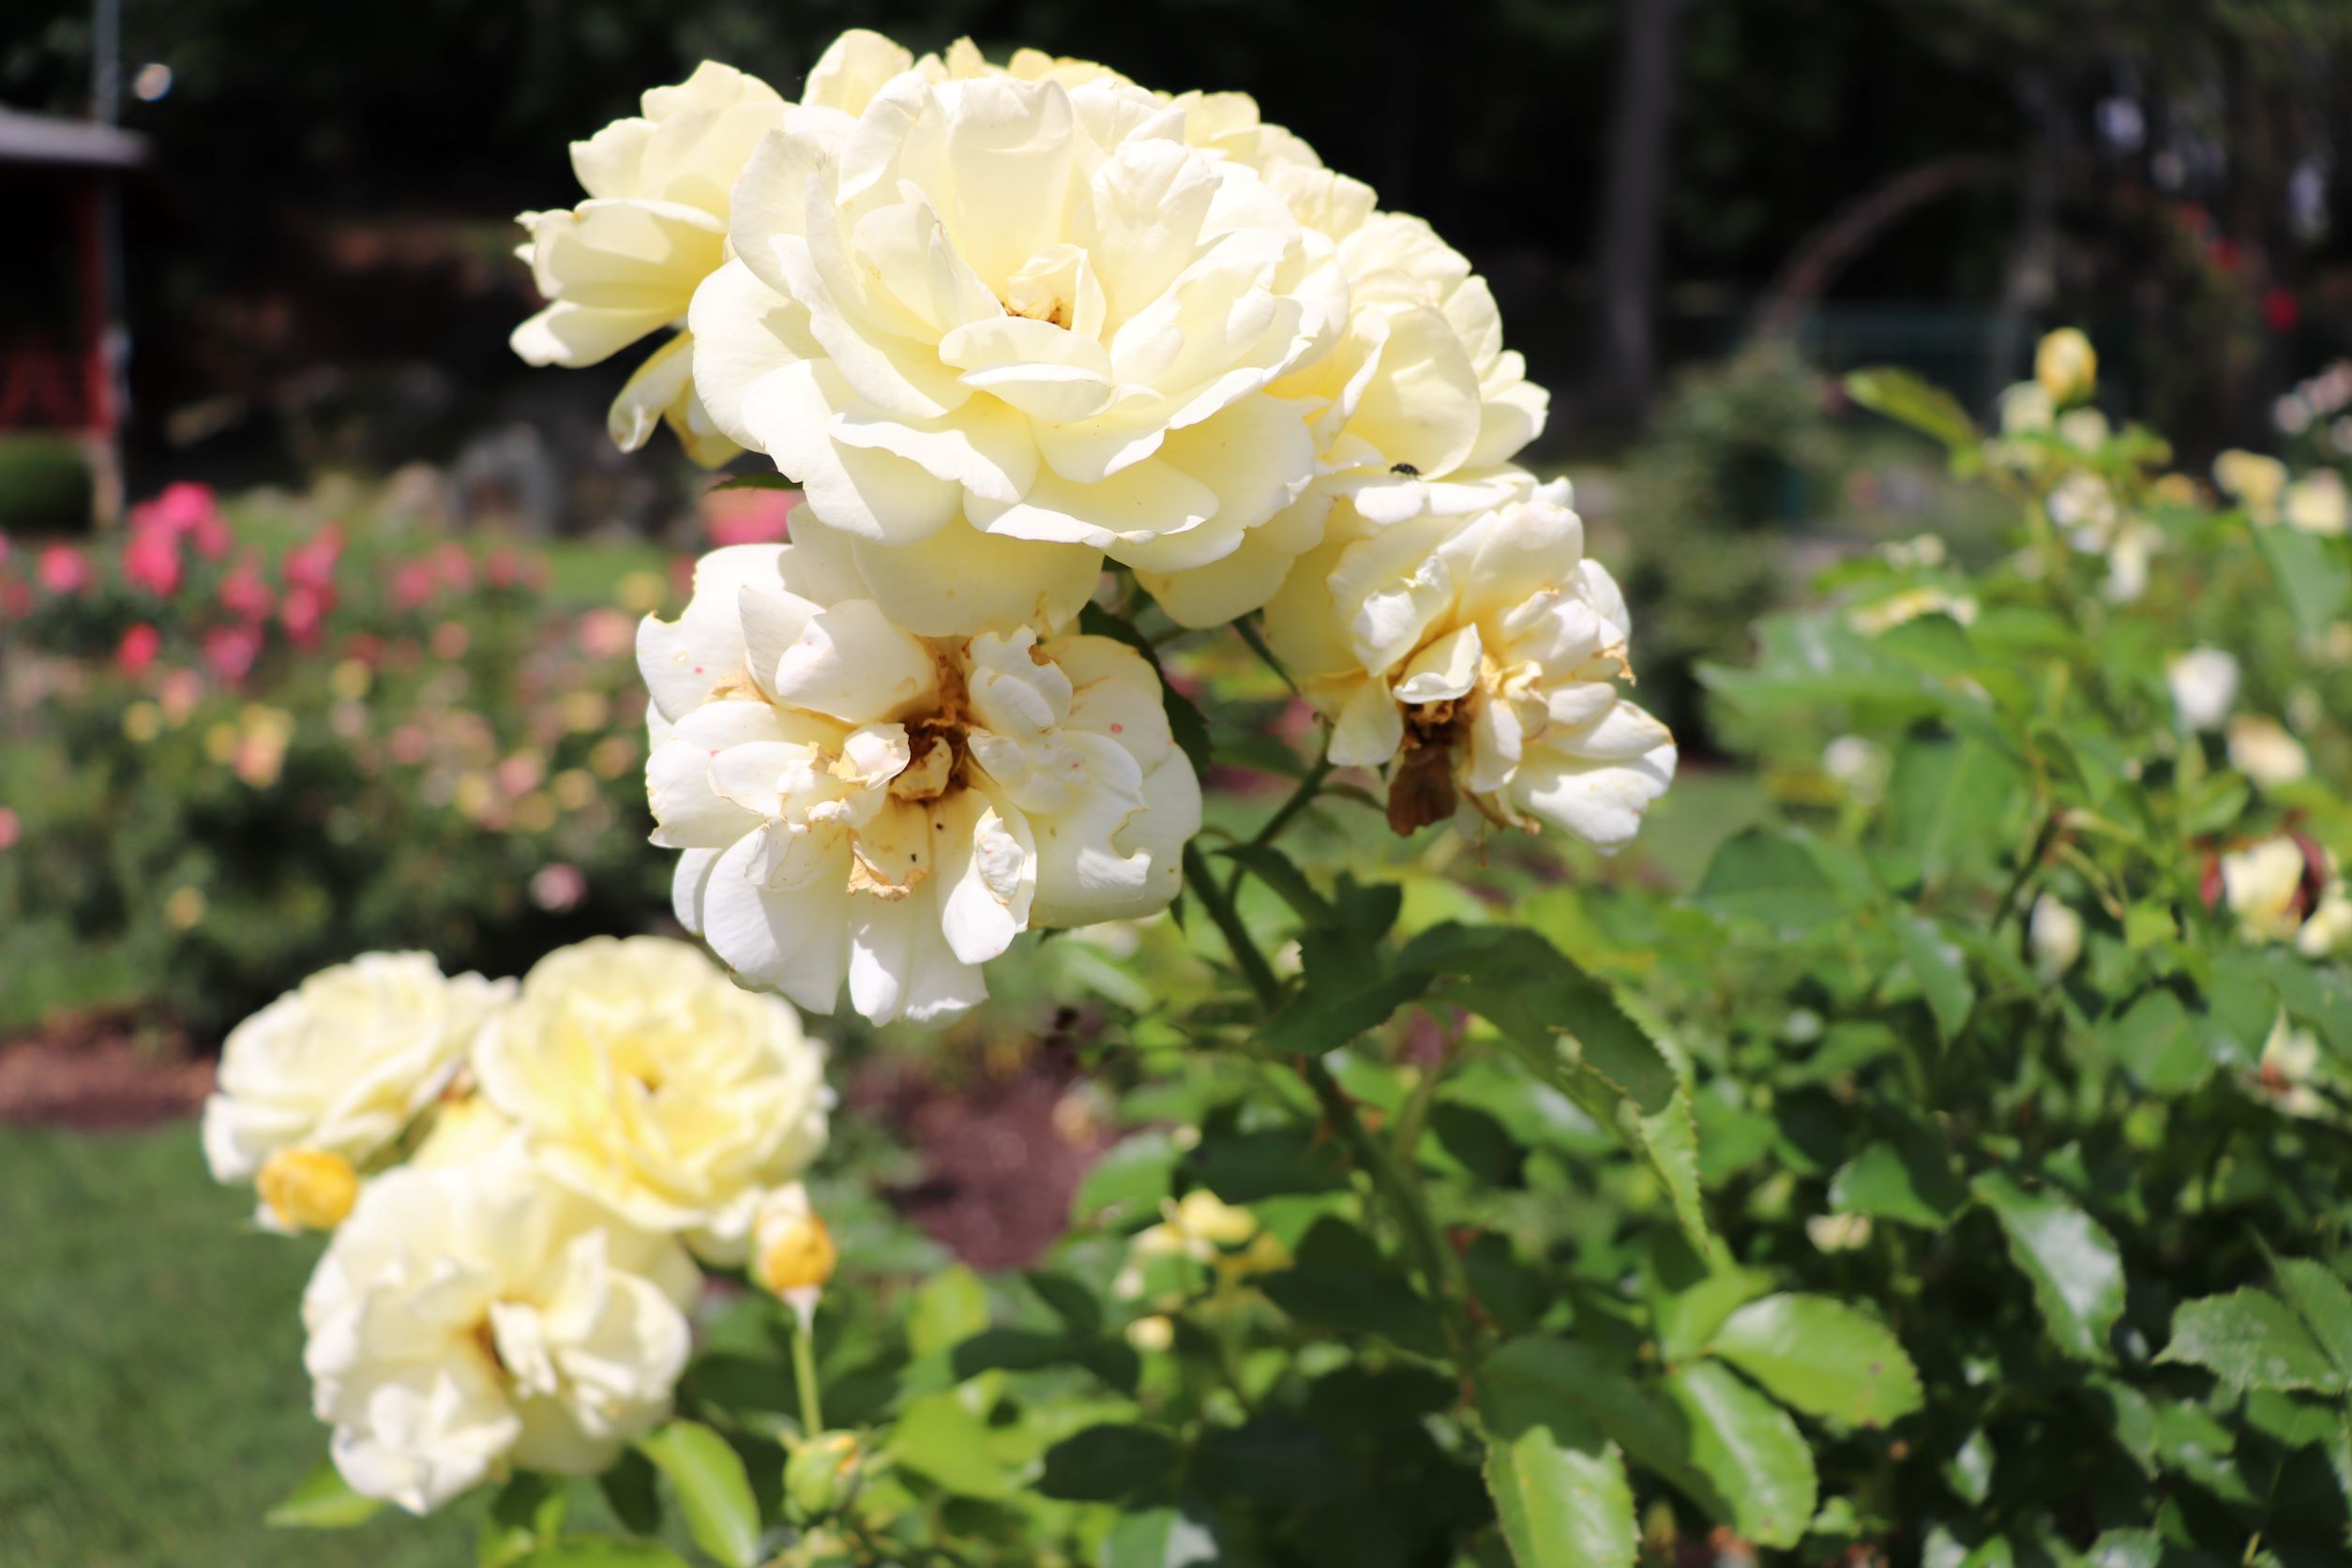 image of pale yellow rose close up at norwich rose garden.